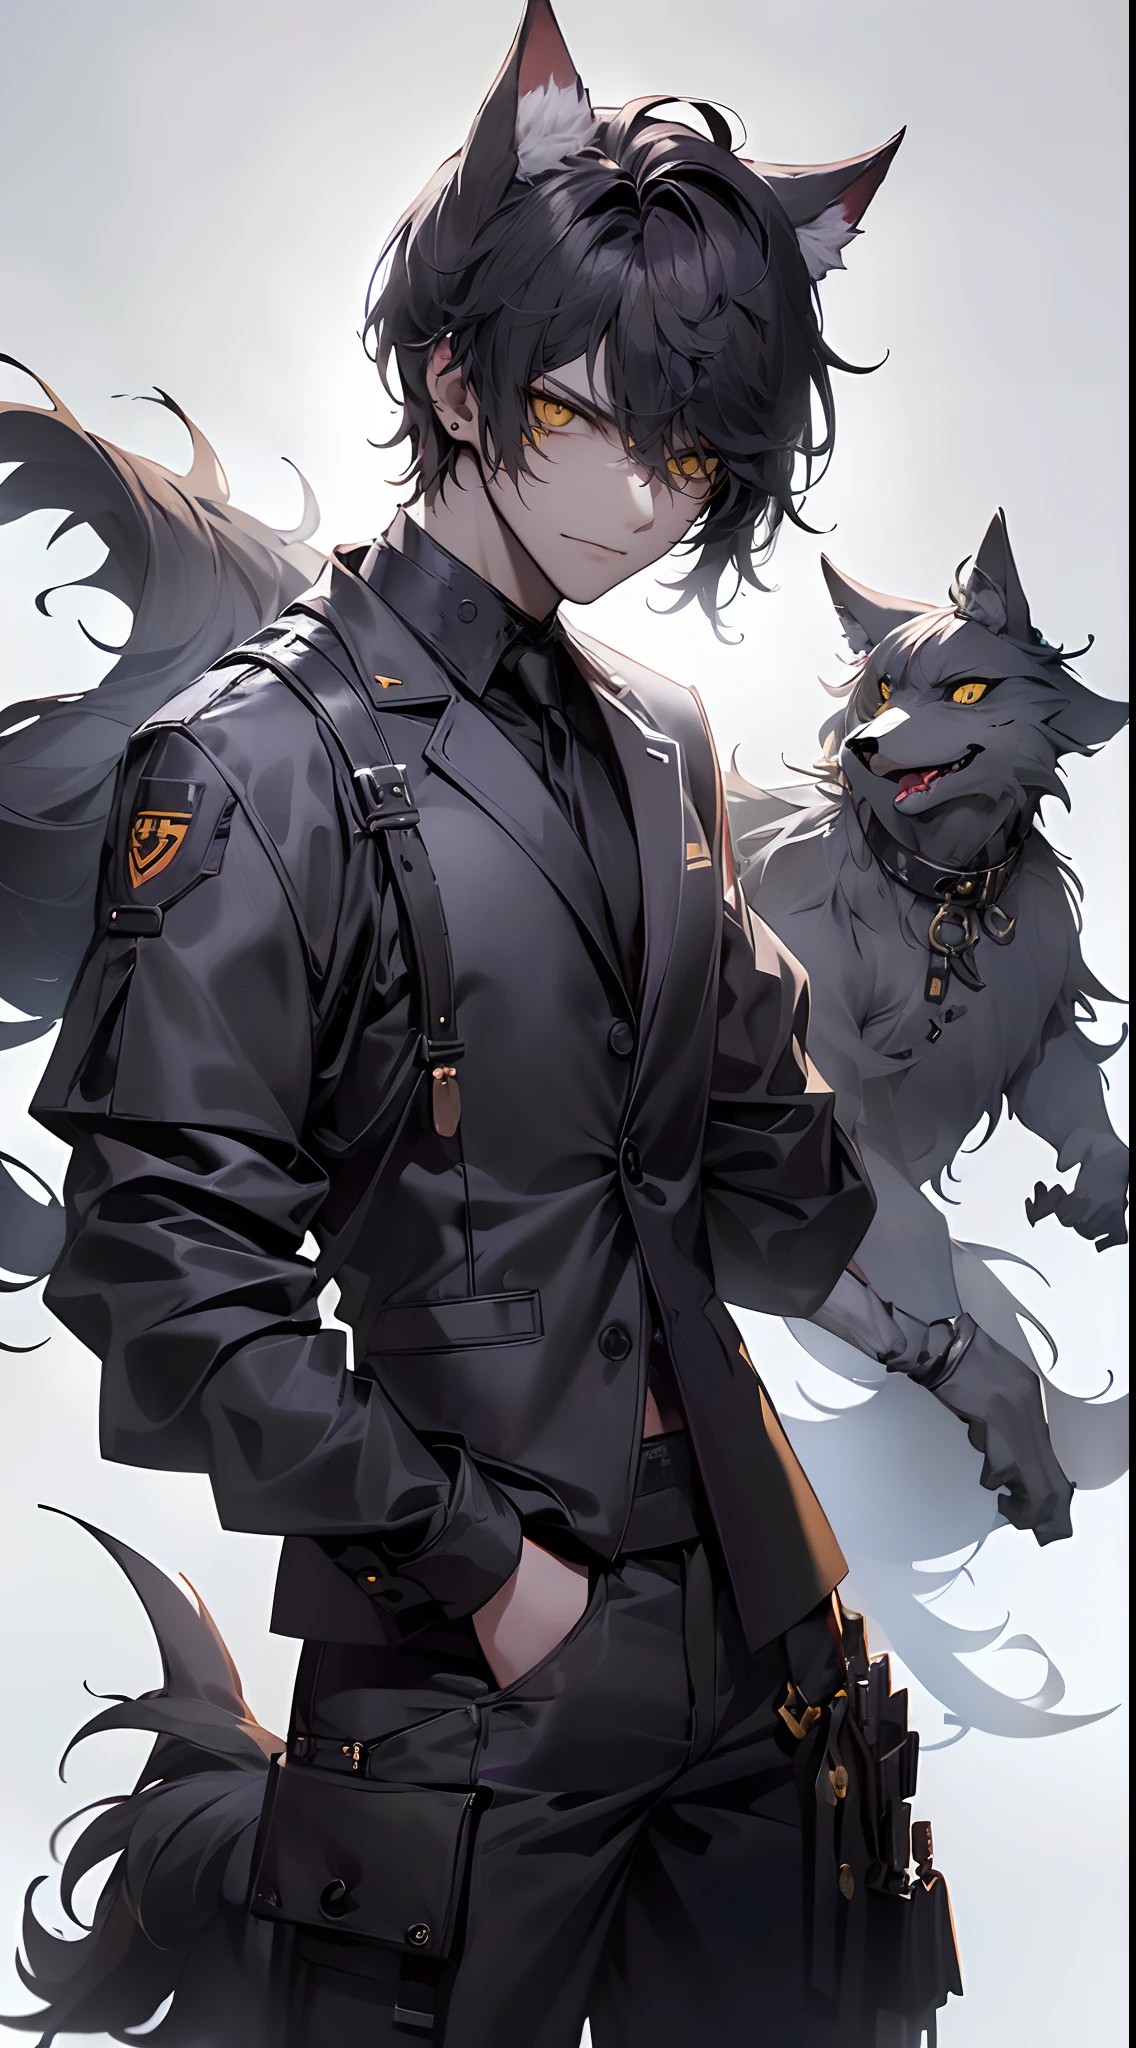 (4K works))、​masterpiece、(top-quality)、((Full moon and crow isolated on black background))、((Horror background))、Korean Male、Adult male、((Adult 26 years old))、((Adult older brother))、((werewolf man))、((The Man with Wolf Ears))、((Face similar to Hyun Jin))、Cool Men、tall、((Glaring expression))、((Strong eyes))、((Black cool werewolf fashion))、((Long sleeve long trouser style))、((smaller face))、Slim body、((hooligan))、((Black short-haired))、((Yellow eyes))、((shot from front))、((Shot alone))、((Solo Photography))、Professional Photos、((Focus zoom in))、((Upper body photography))、((Face enhancement))、Wolf's Pose、((Halloween Photos))、Horror Pictures、((Werewolf costume))